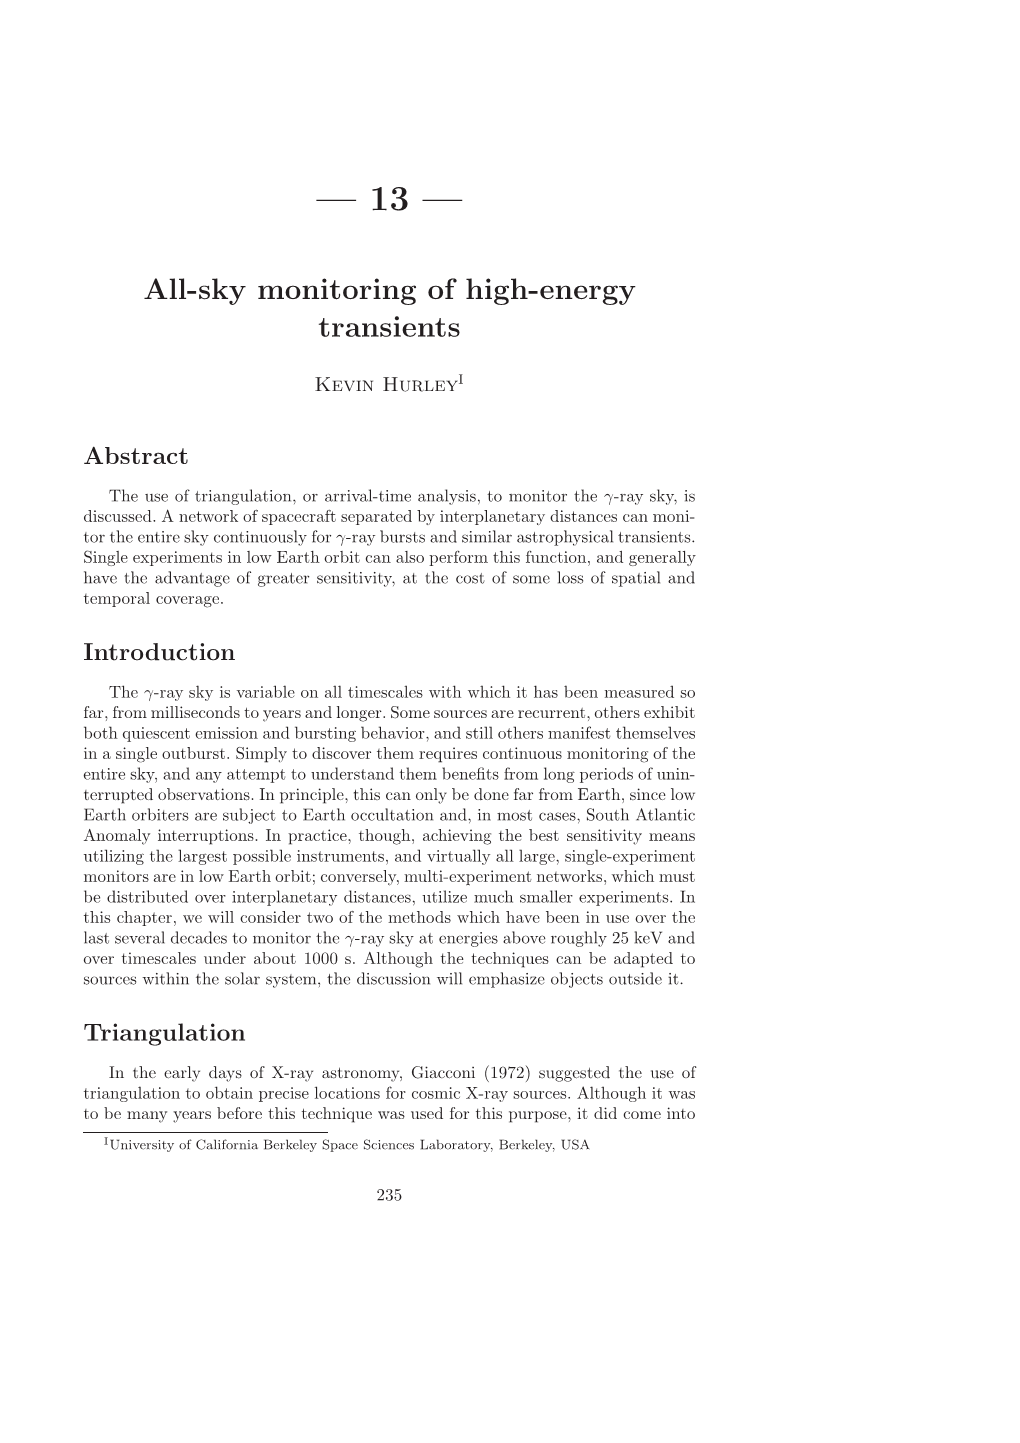 All-Sky Monitoring of High-Energy Transients